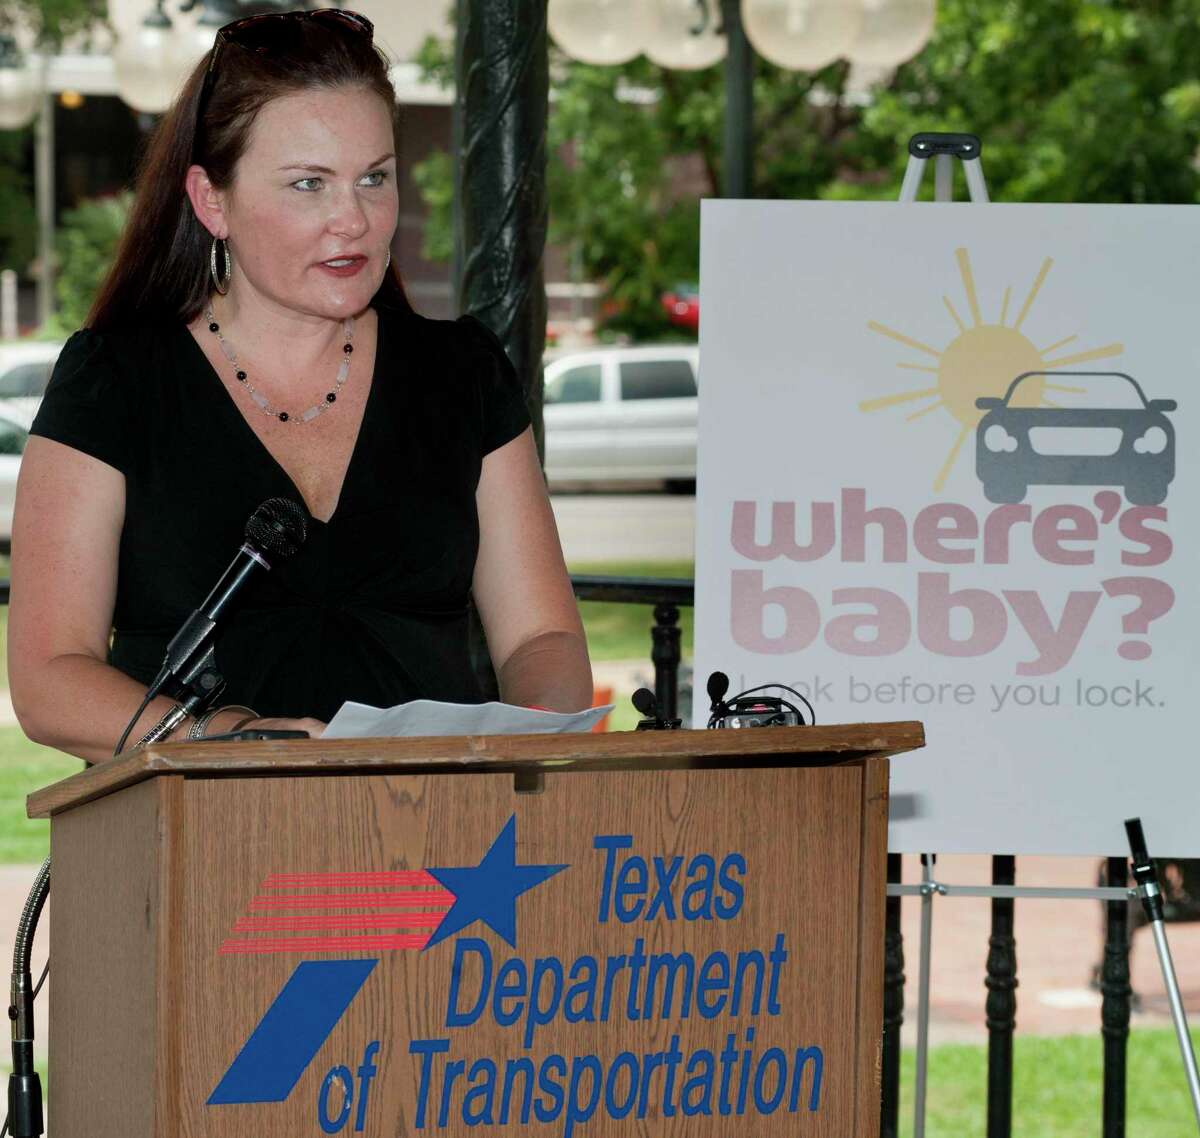 Kristie Reeves-Cavaliero, who lost a child to heatstroke, speaks at a news conference in 2012 to raise awareness and help prevent future tragedies.